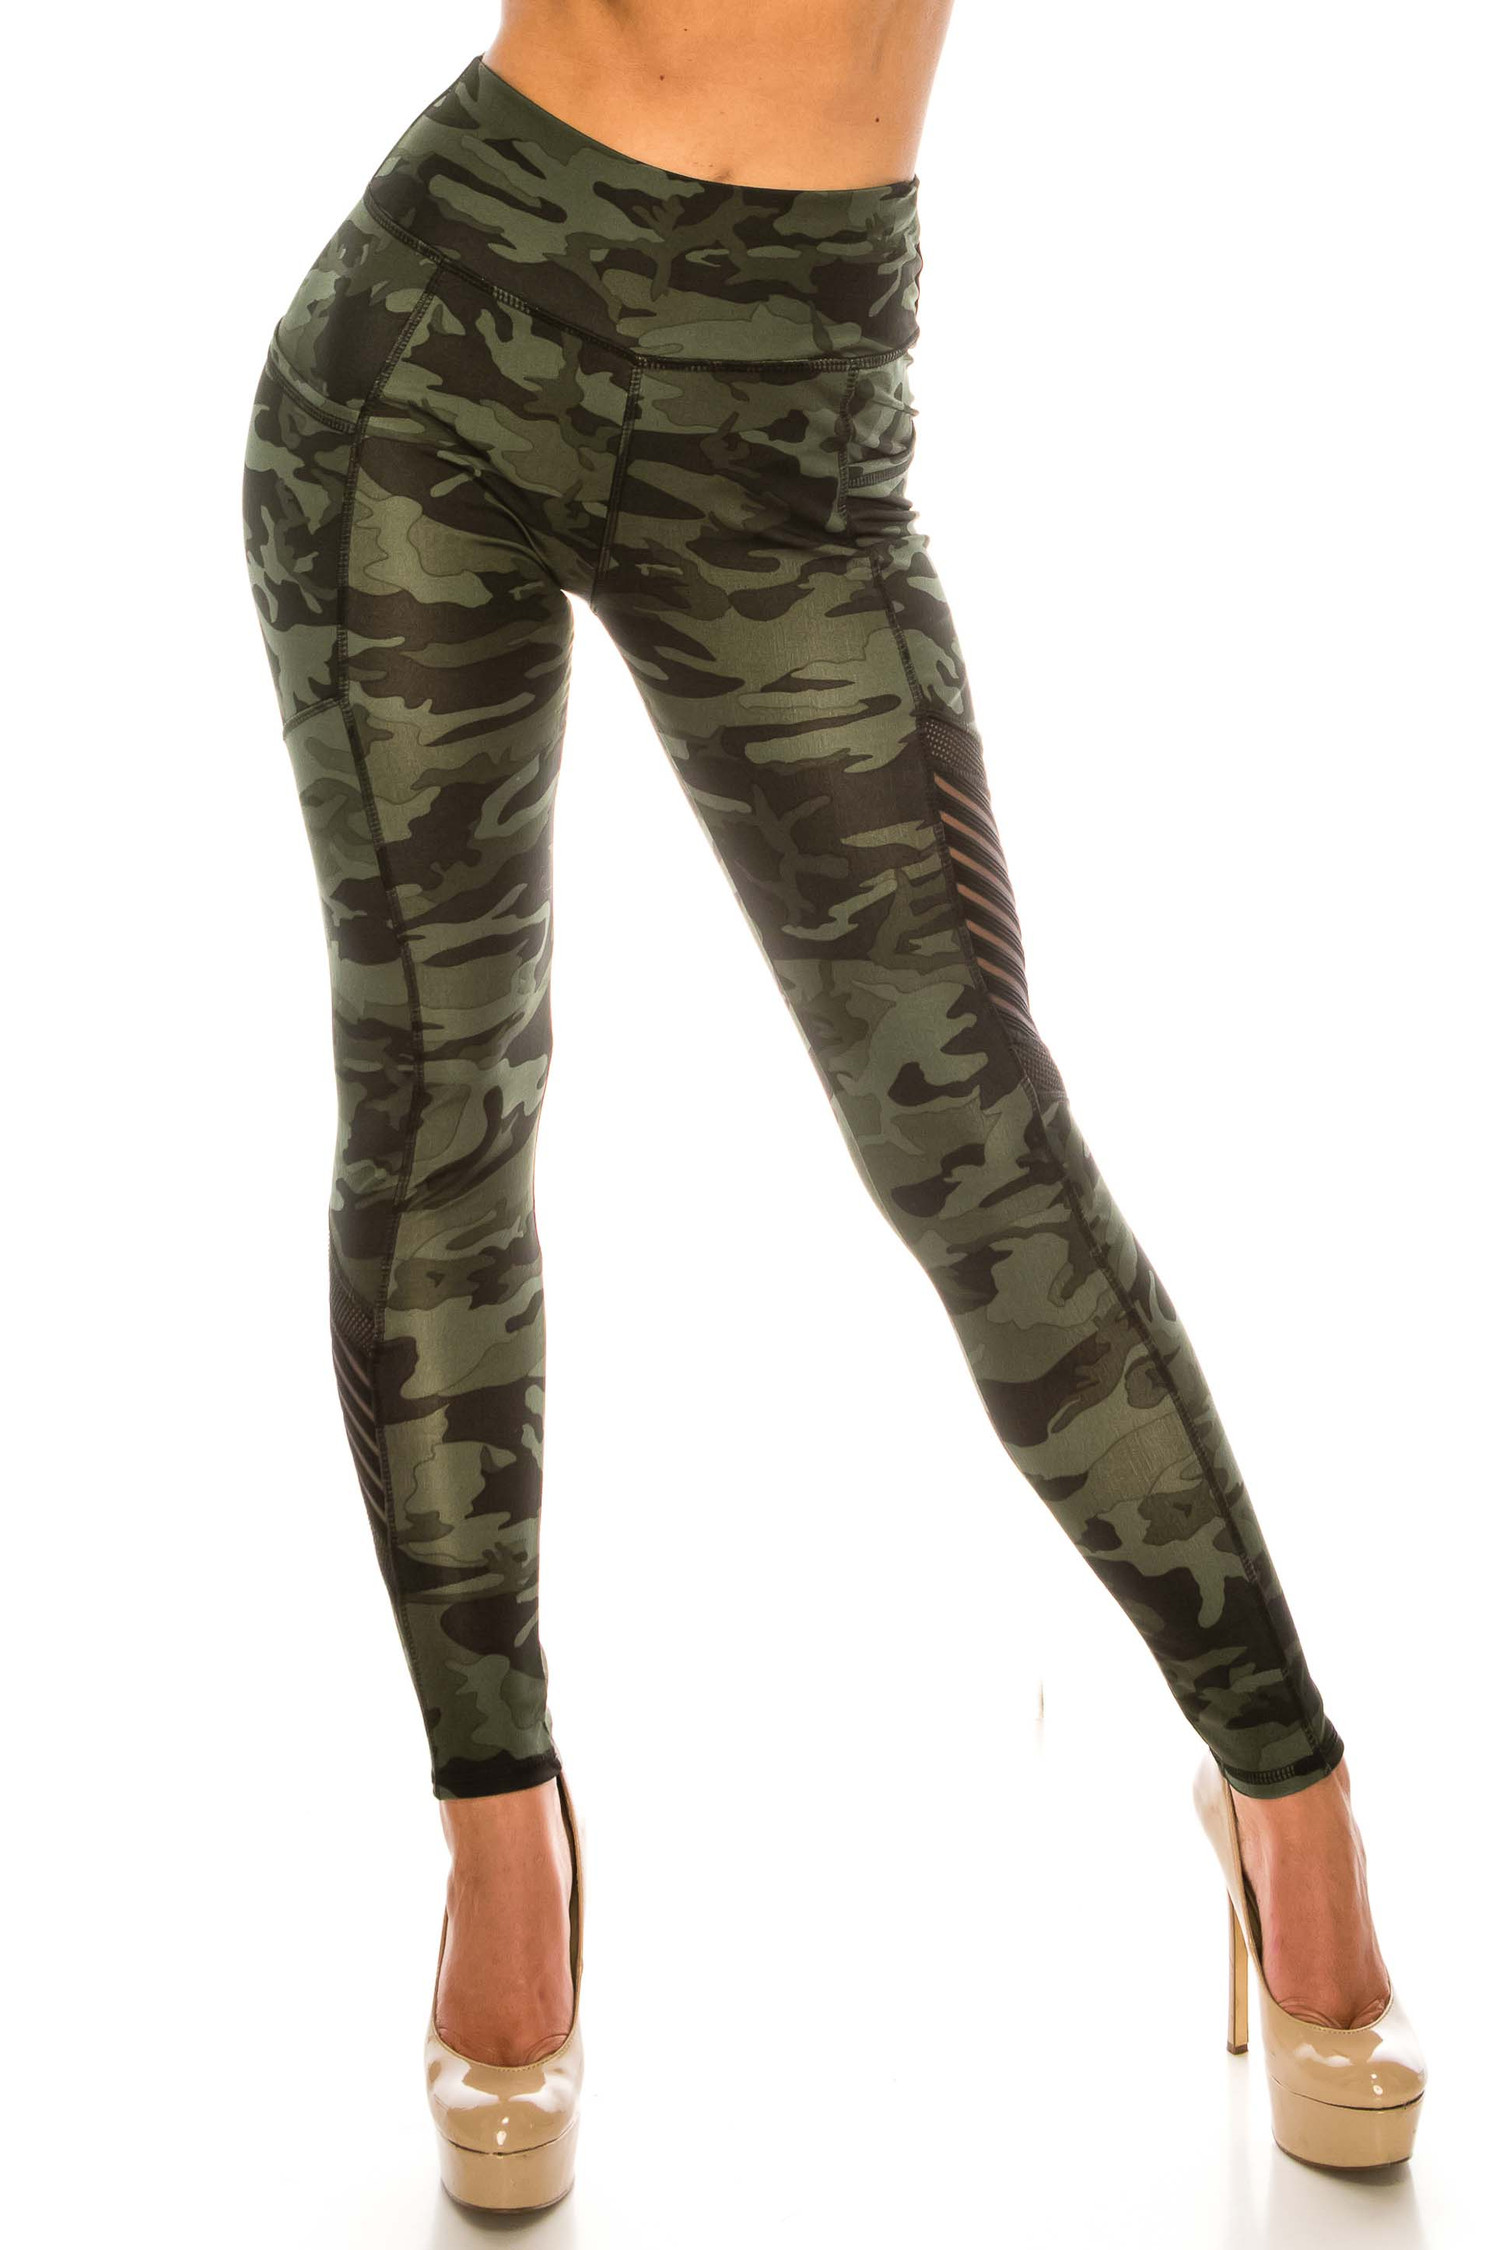 Activewear High Waisted Camo Print Yoga Pants with Cross Knit Mesh Sides  and Pockets - Its All Leggings